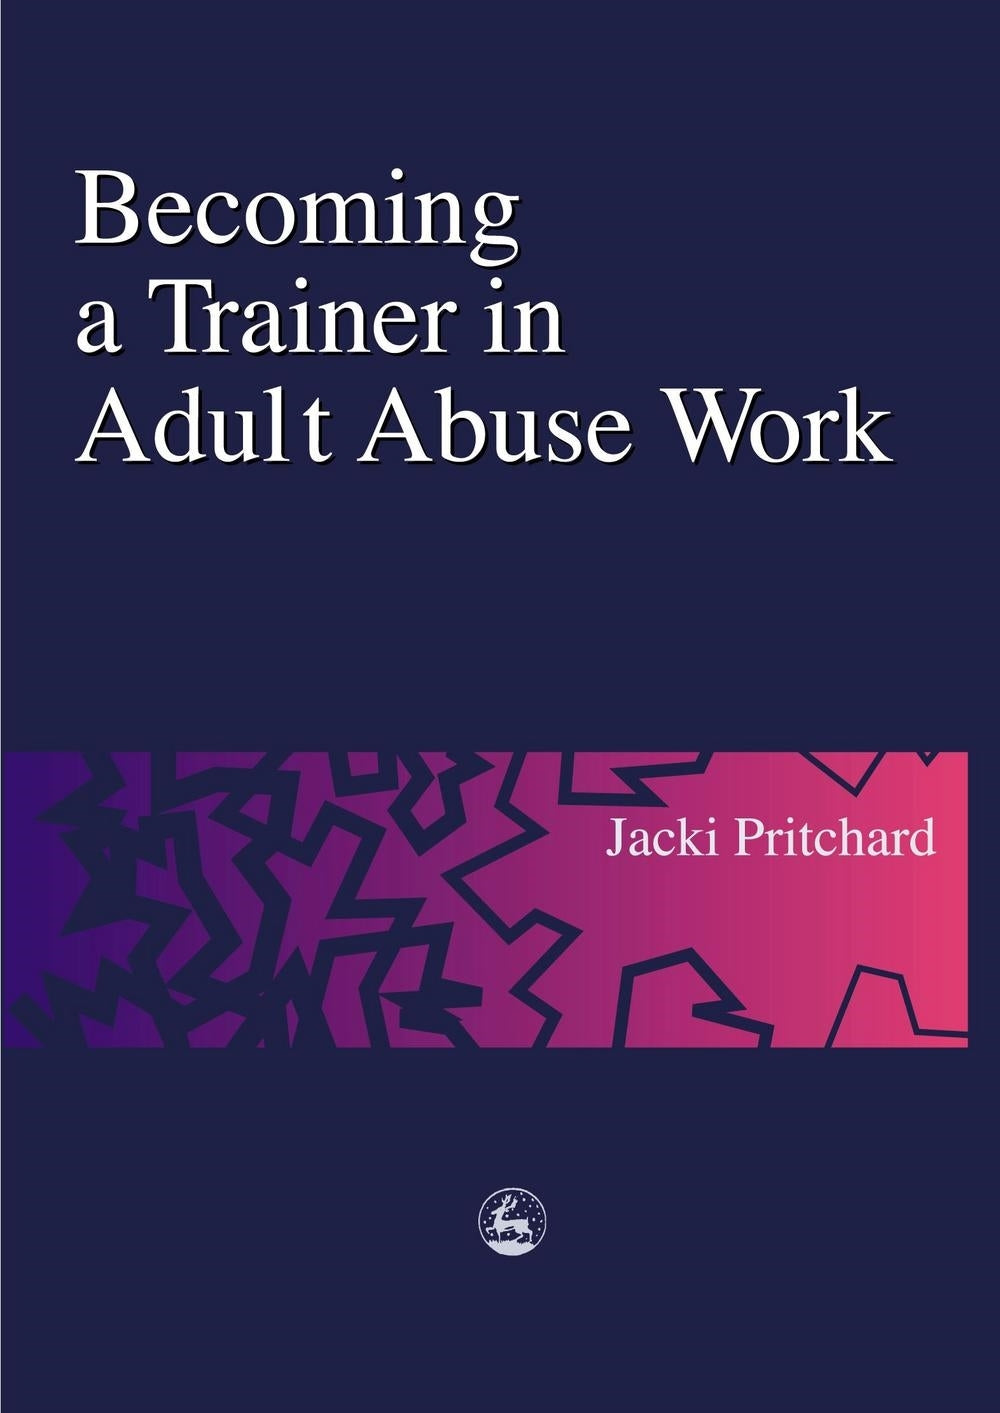 Becoming a Trainer in Adult Abuse Work by Jacki Pritchard